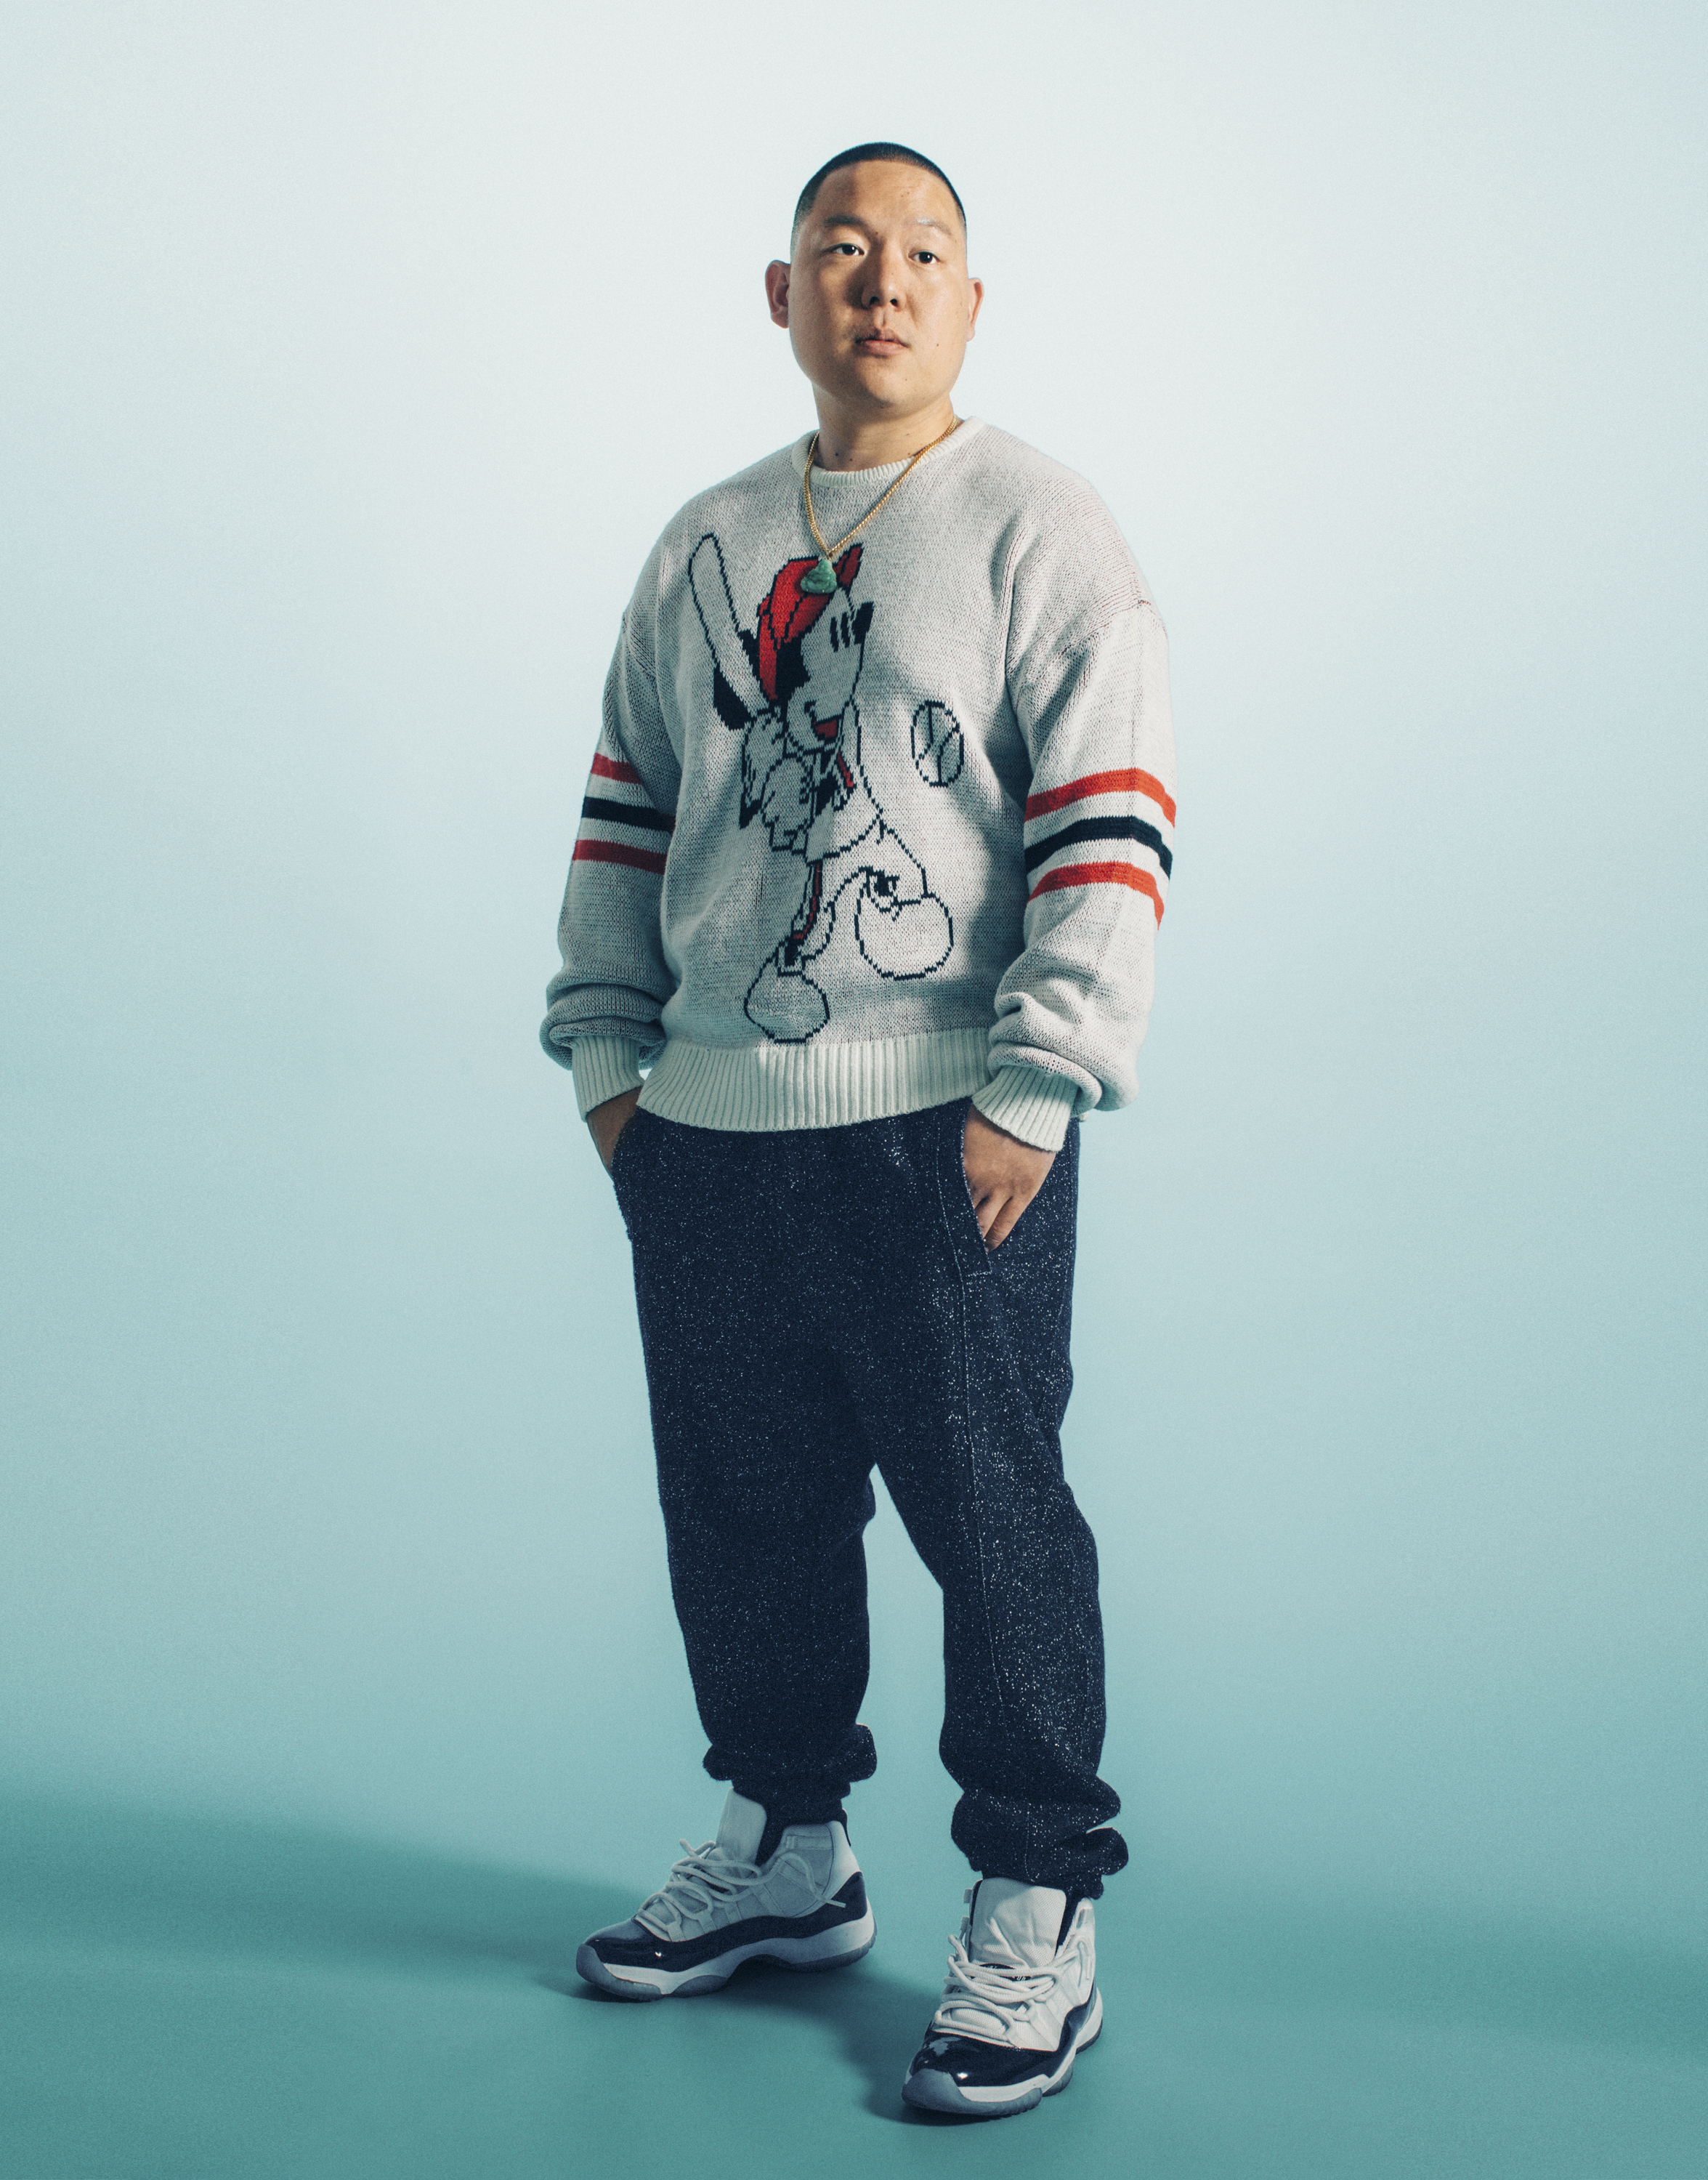 Acquired Taste: Eddie Huang readies viewers, and himself, for the sitcom version of his life. (Adam Krause for TIME)